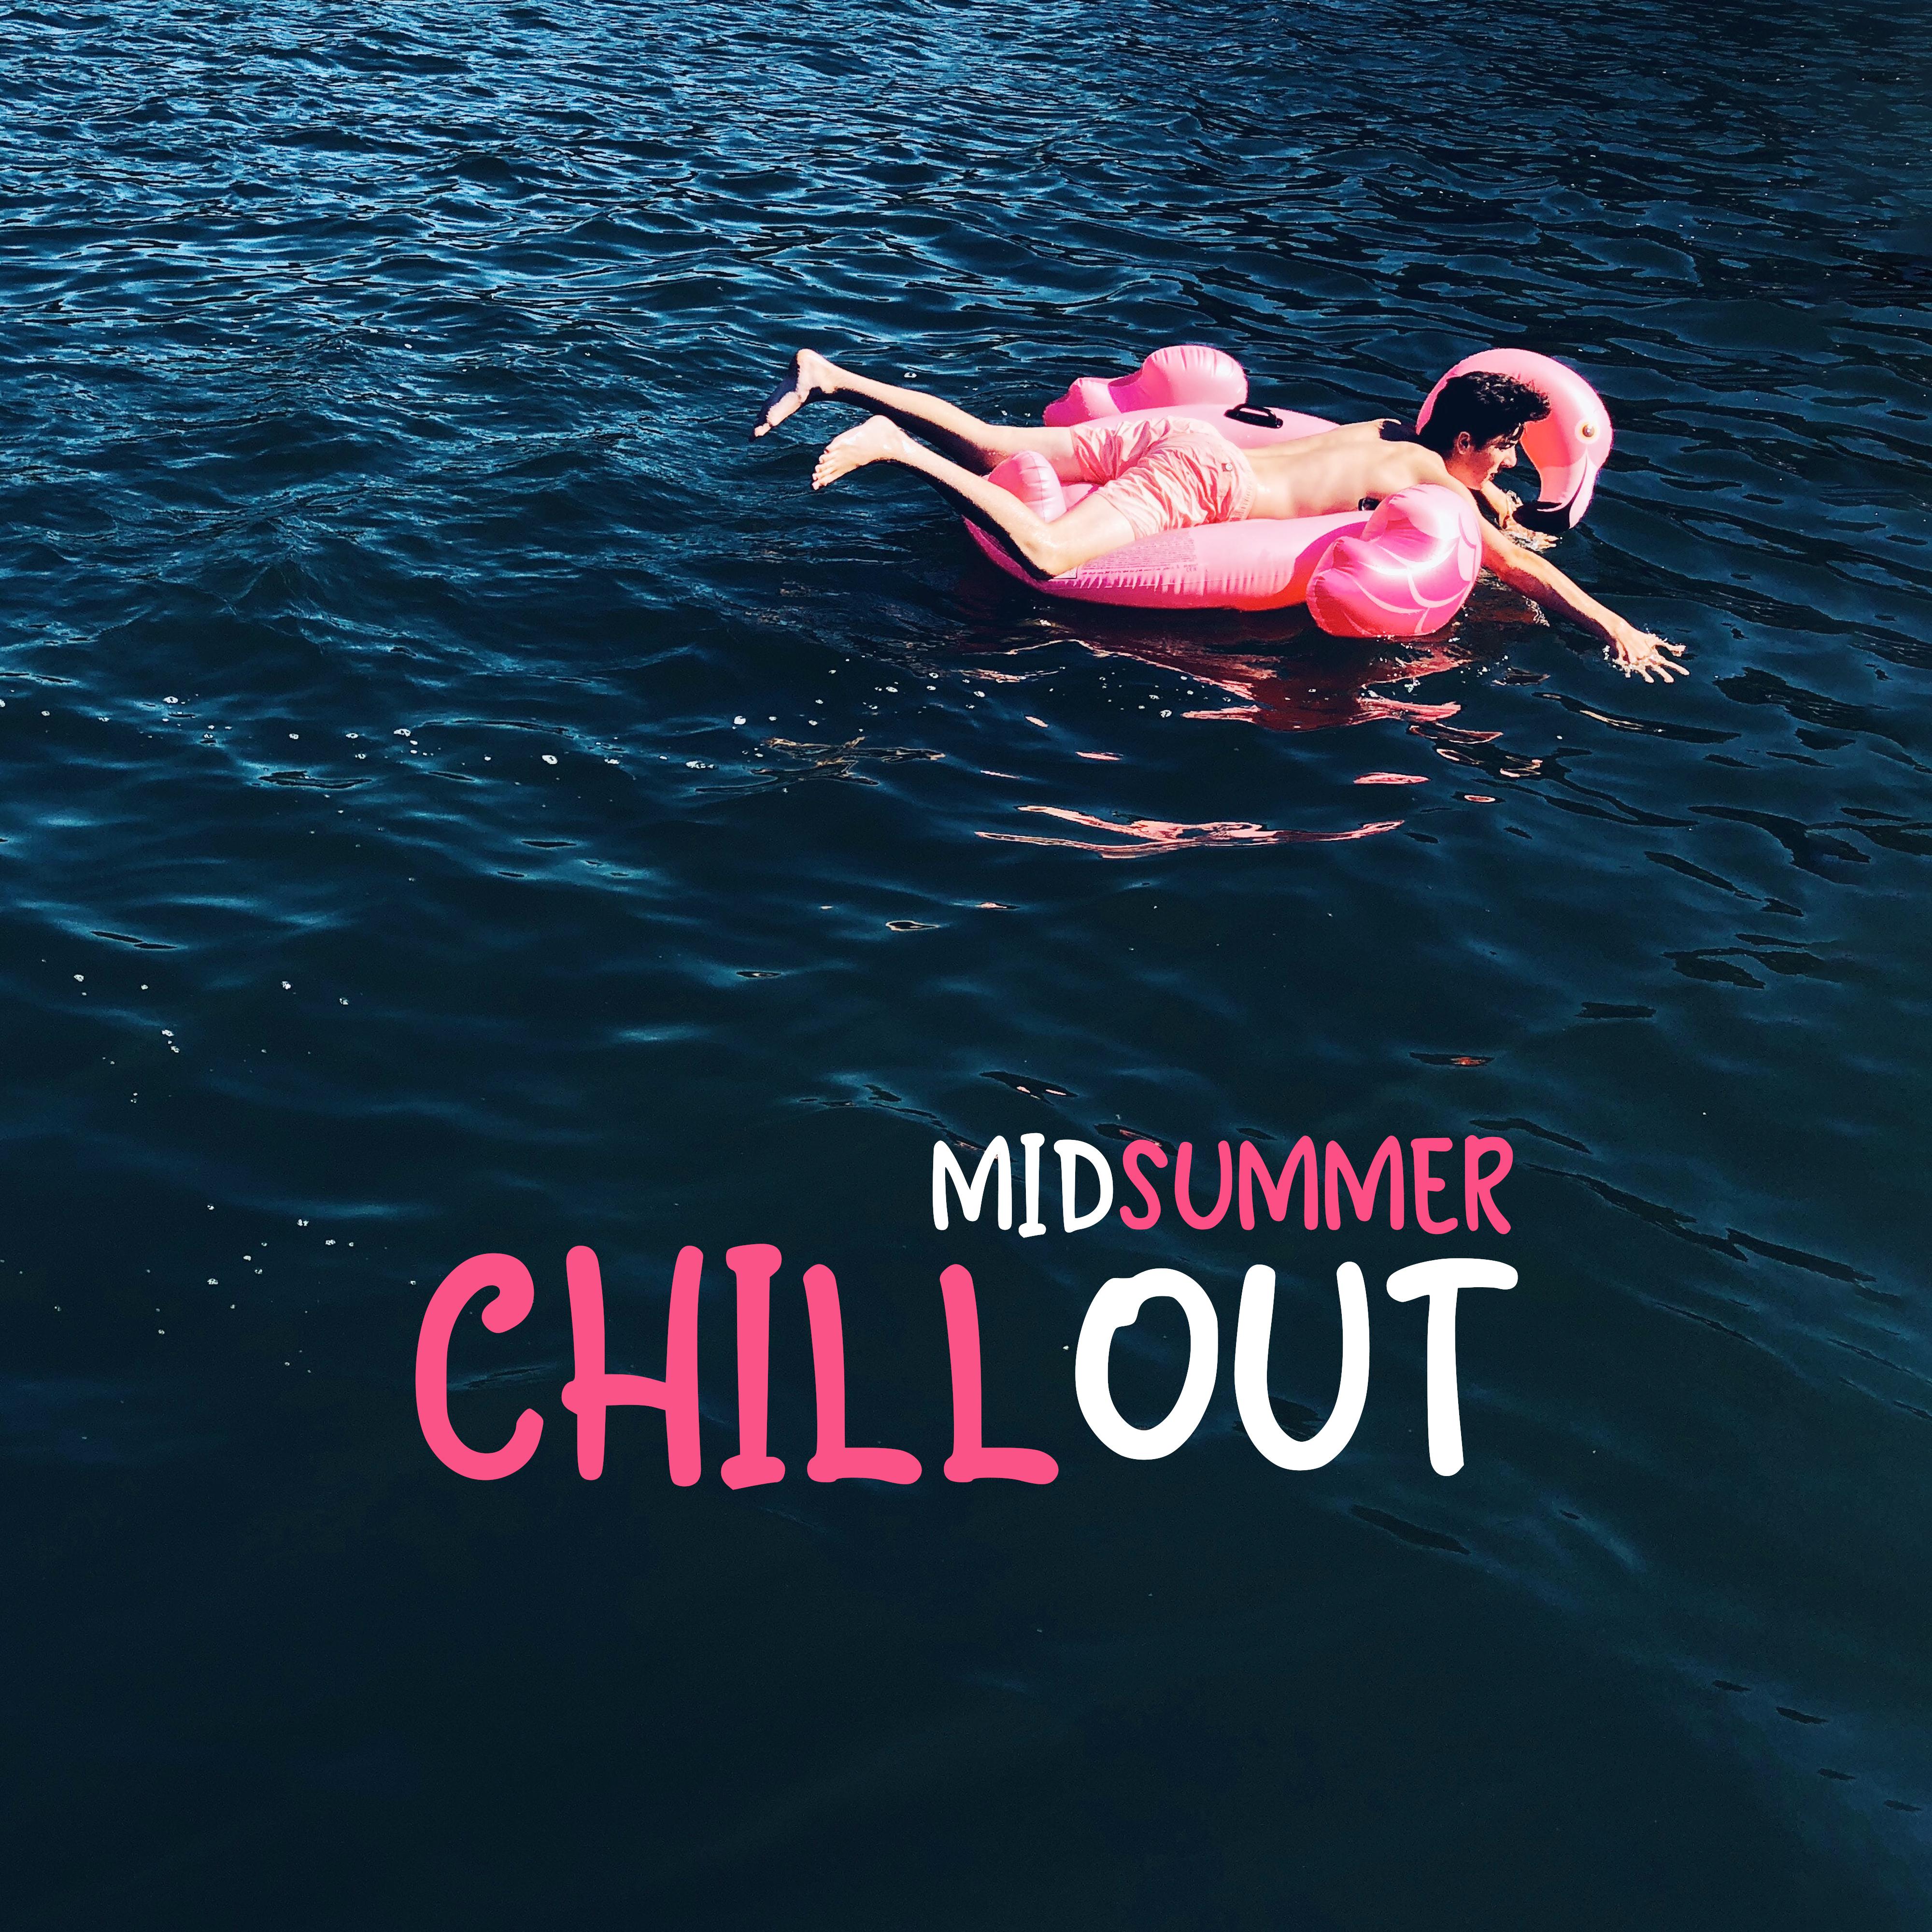 Midsummer Chillout: Relaxing Vibes, Summer Rest, Tranquil Chill Out Waves, Sounds for the Beach